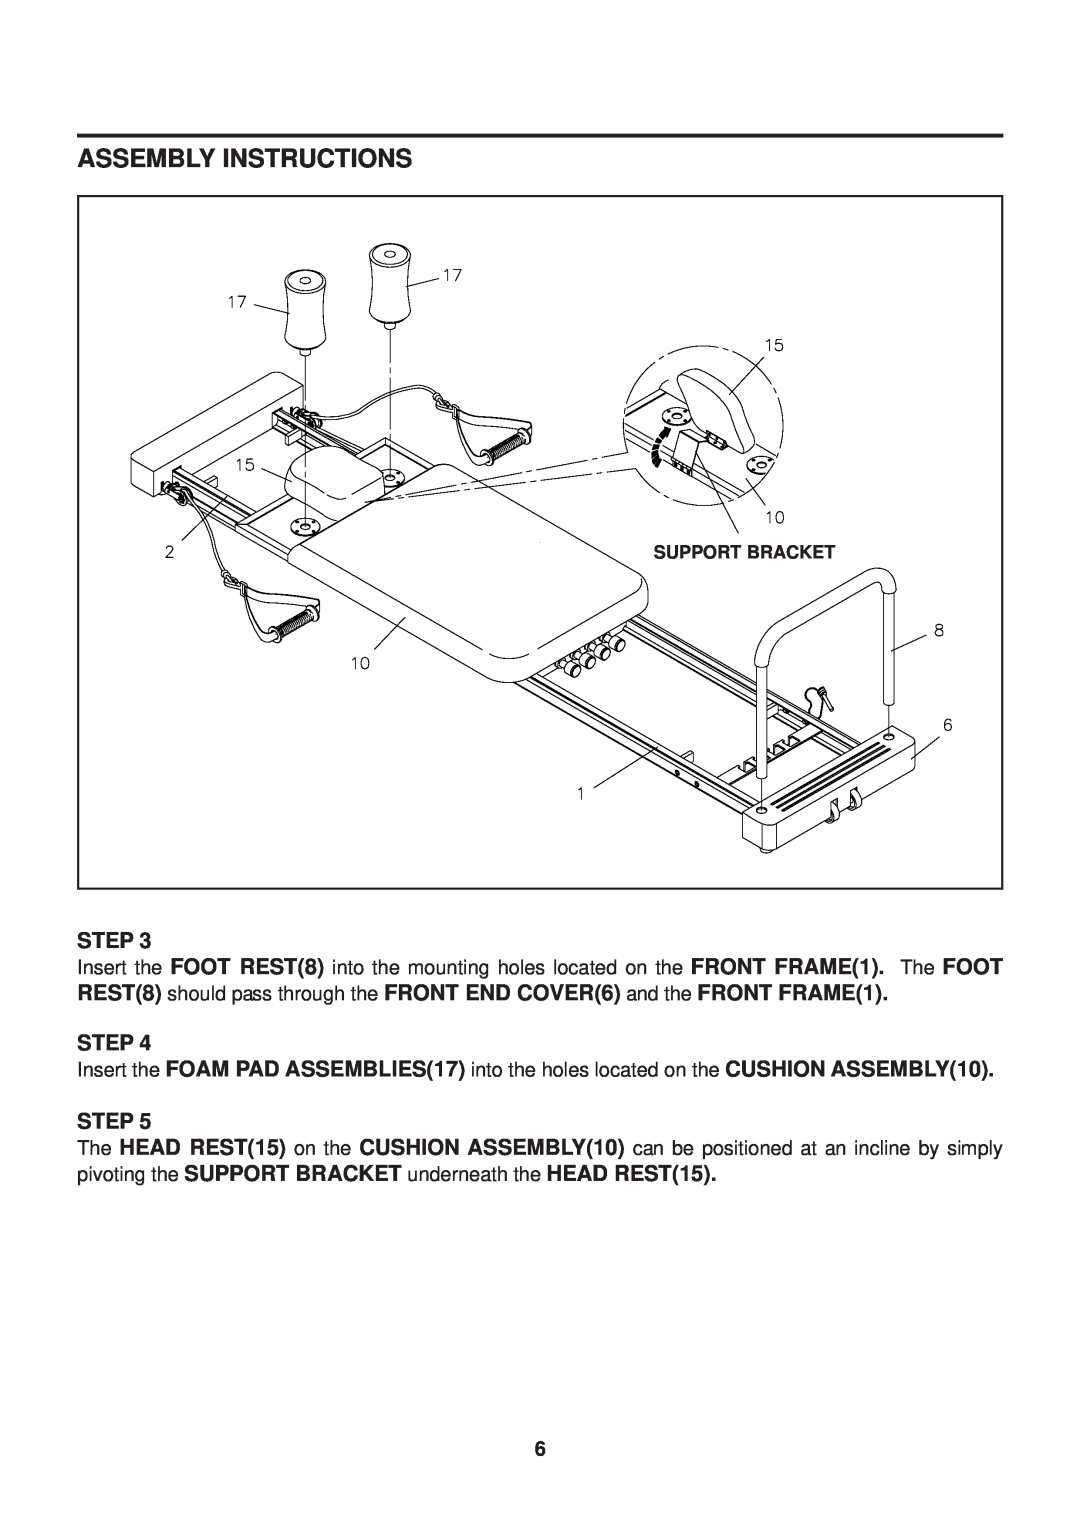 Stamina Products 55-5510 owner manual Assembly Instructions, Support Bracket 